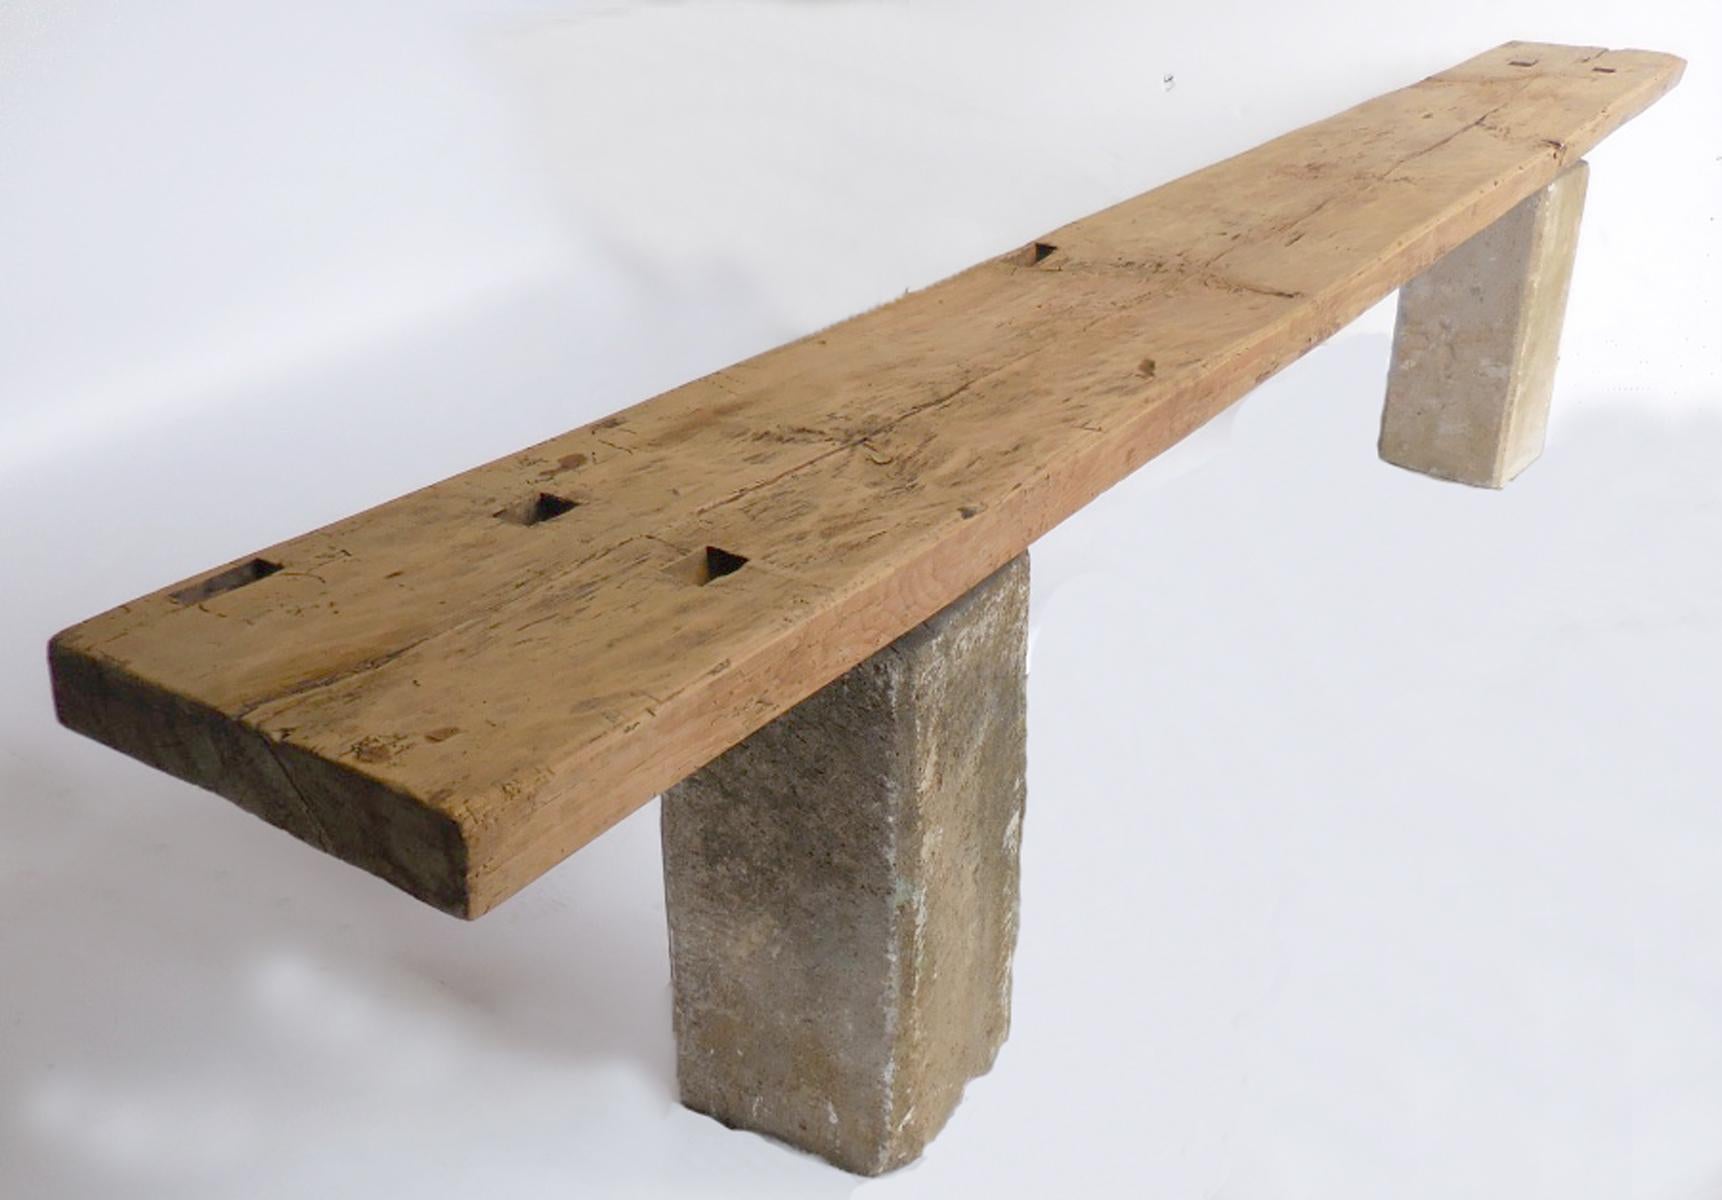 One very long piece of wood top, originally part of a carpenter's bench, atop a pair of old stone bases. All pieces come from the western highlands of Guatemala. Wood has a smooth, naturally worn patina and the natural color of the wood. The bases